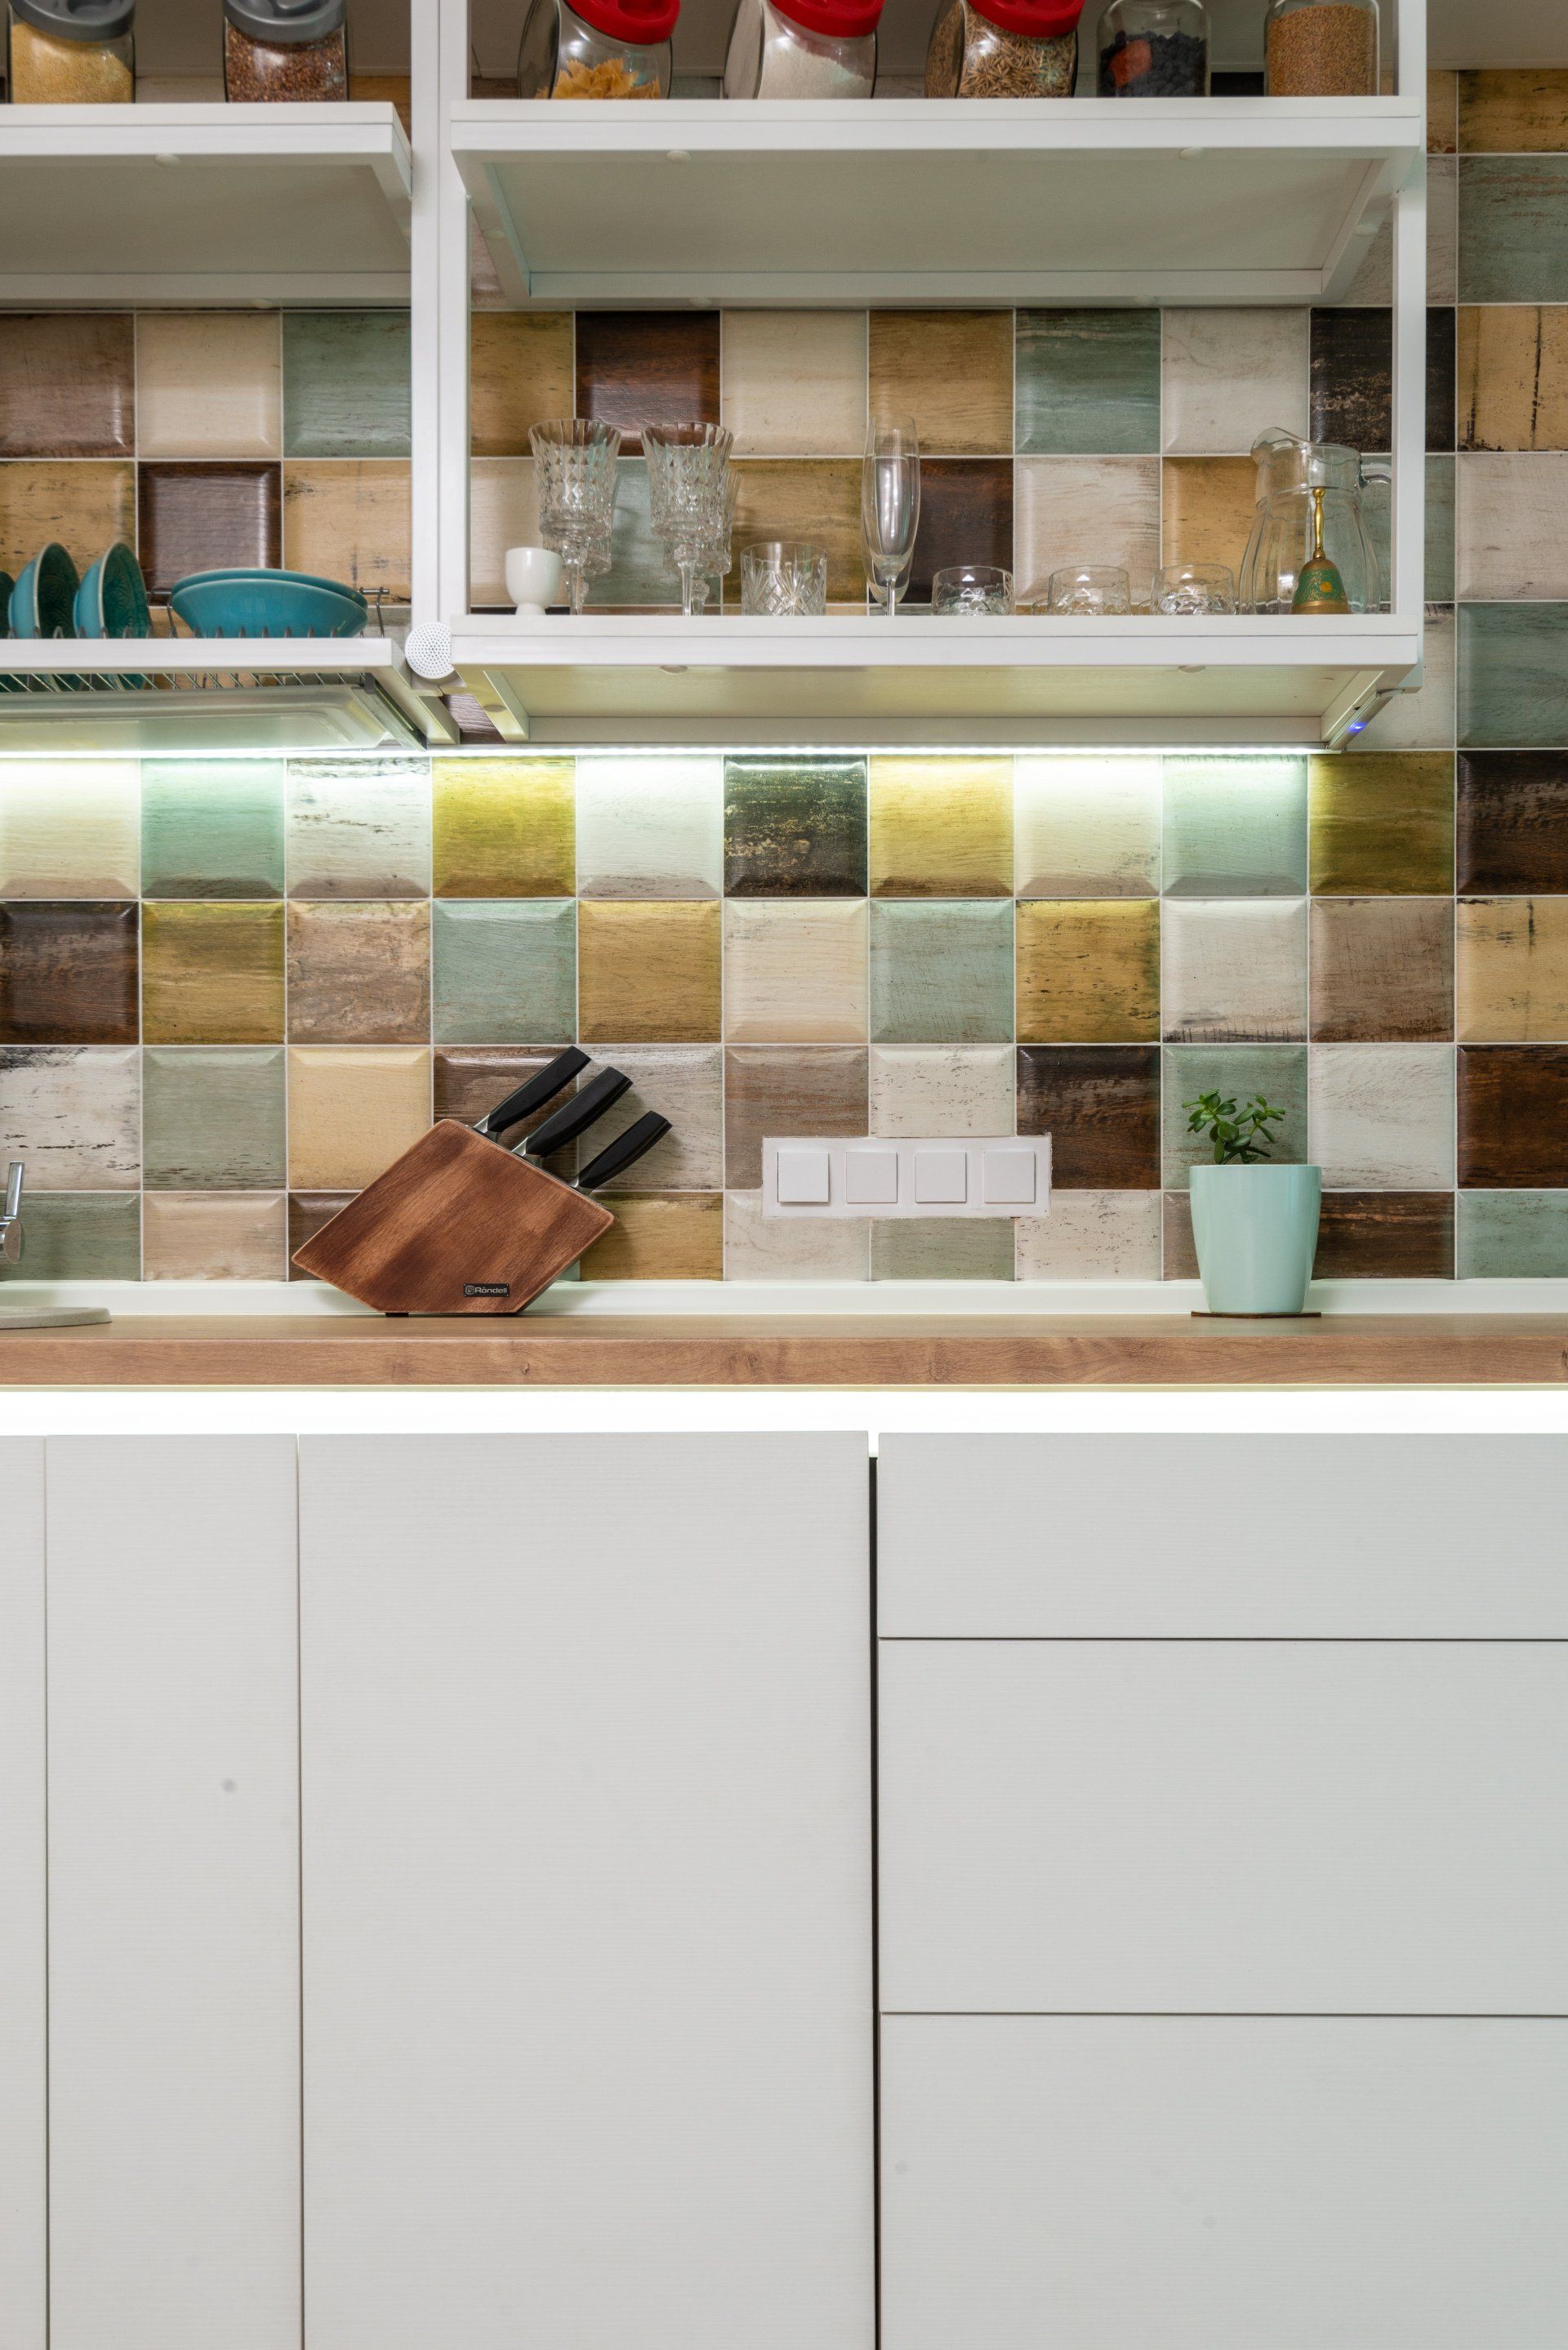 A colorful tile backsplash paired with all white cabinetry.